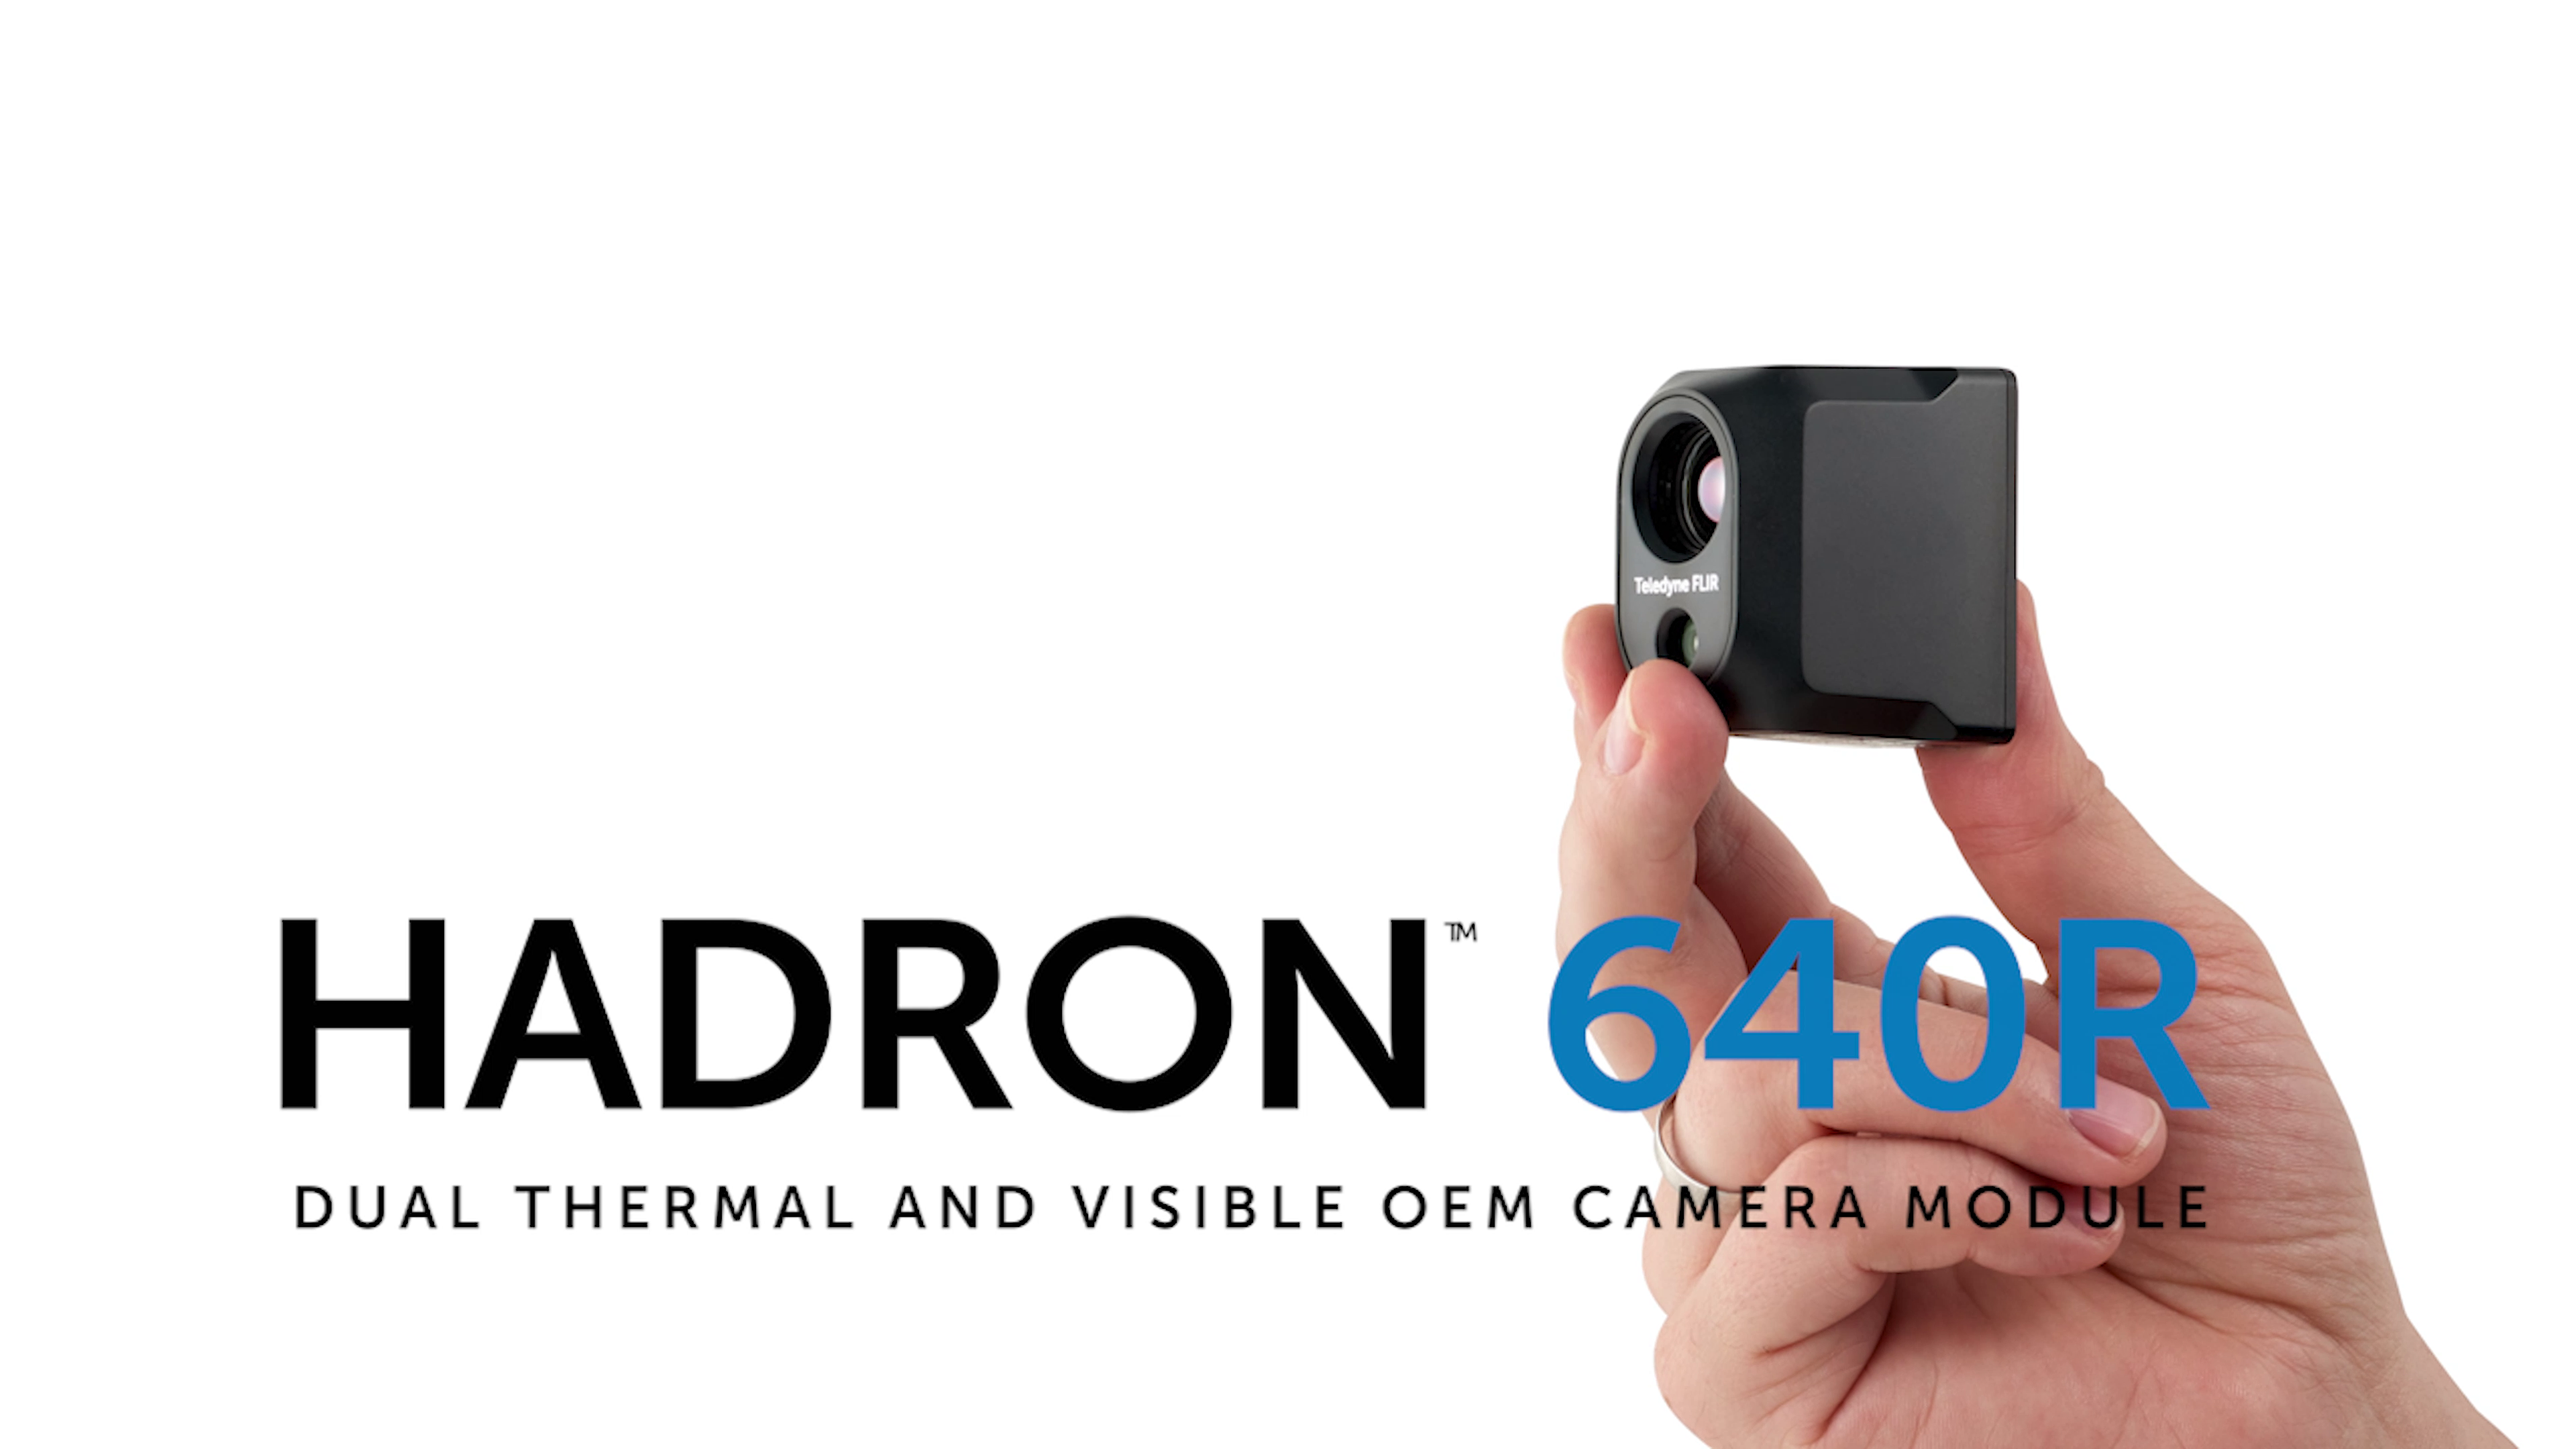 A New Duo Redefining Resolution | The Hadron 640R - Thermal & Visible Camera Module